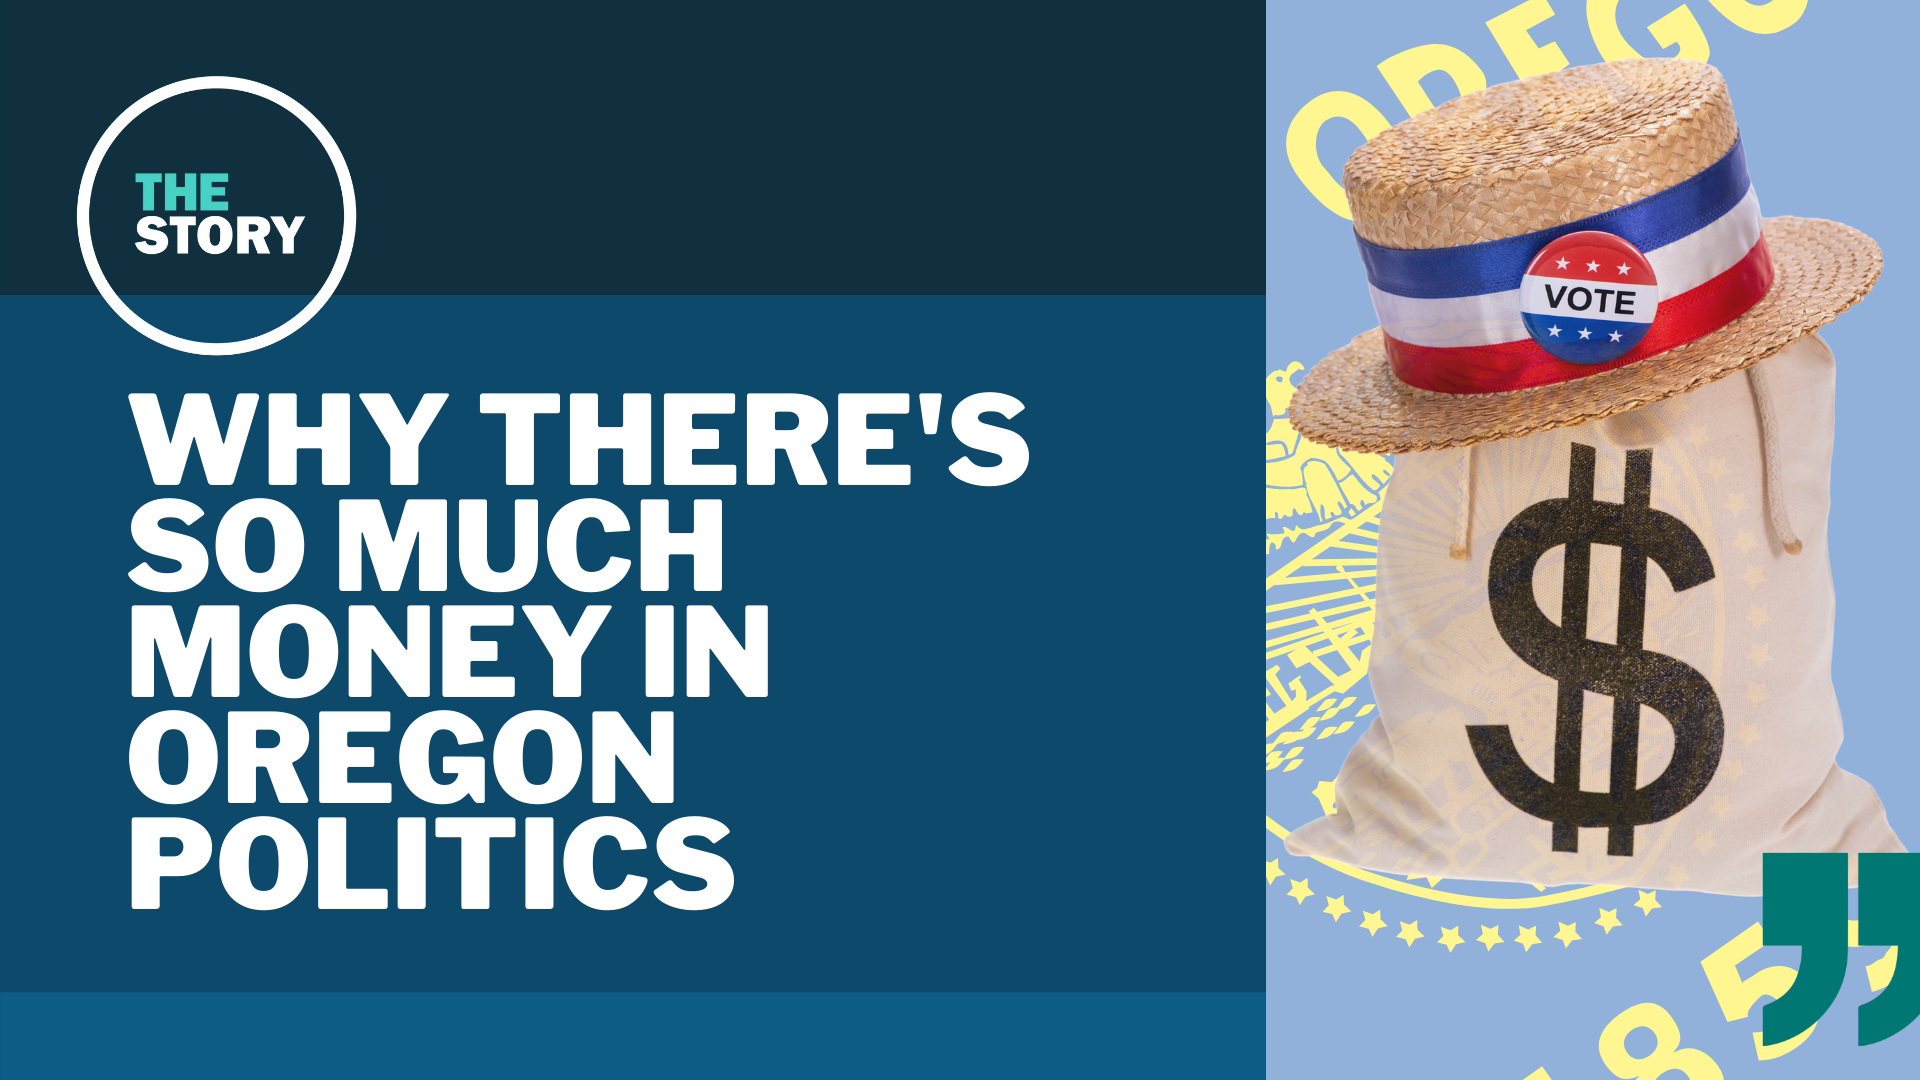 Oregon is one of just five states without laws limiting campaign contributions.